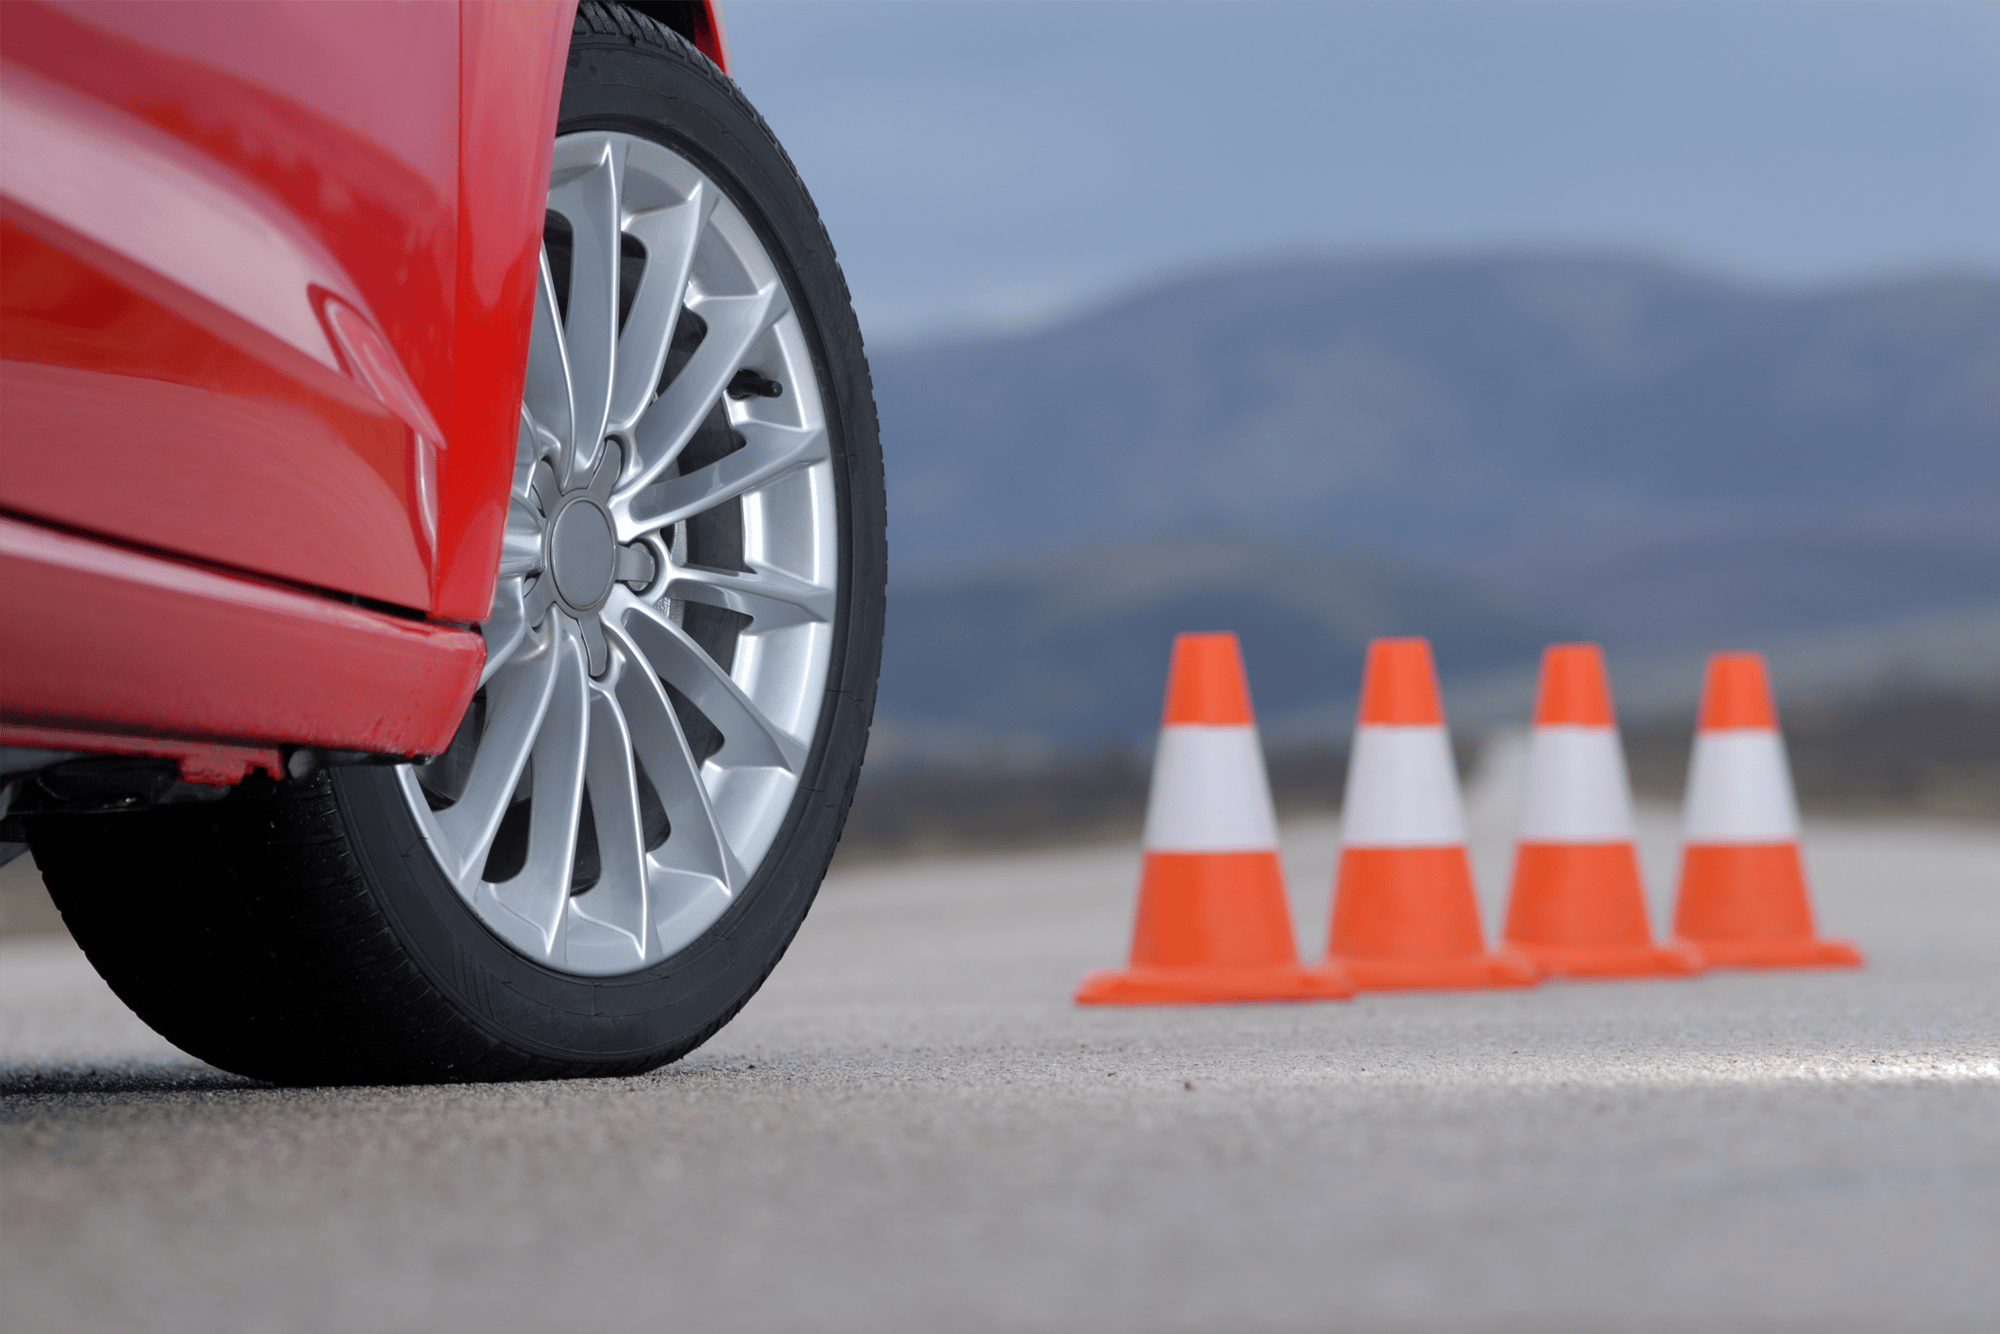 Close up of tire on red car and cones